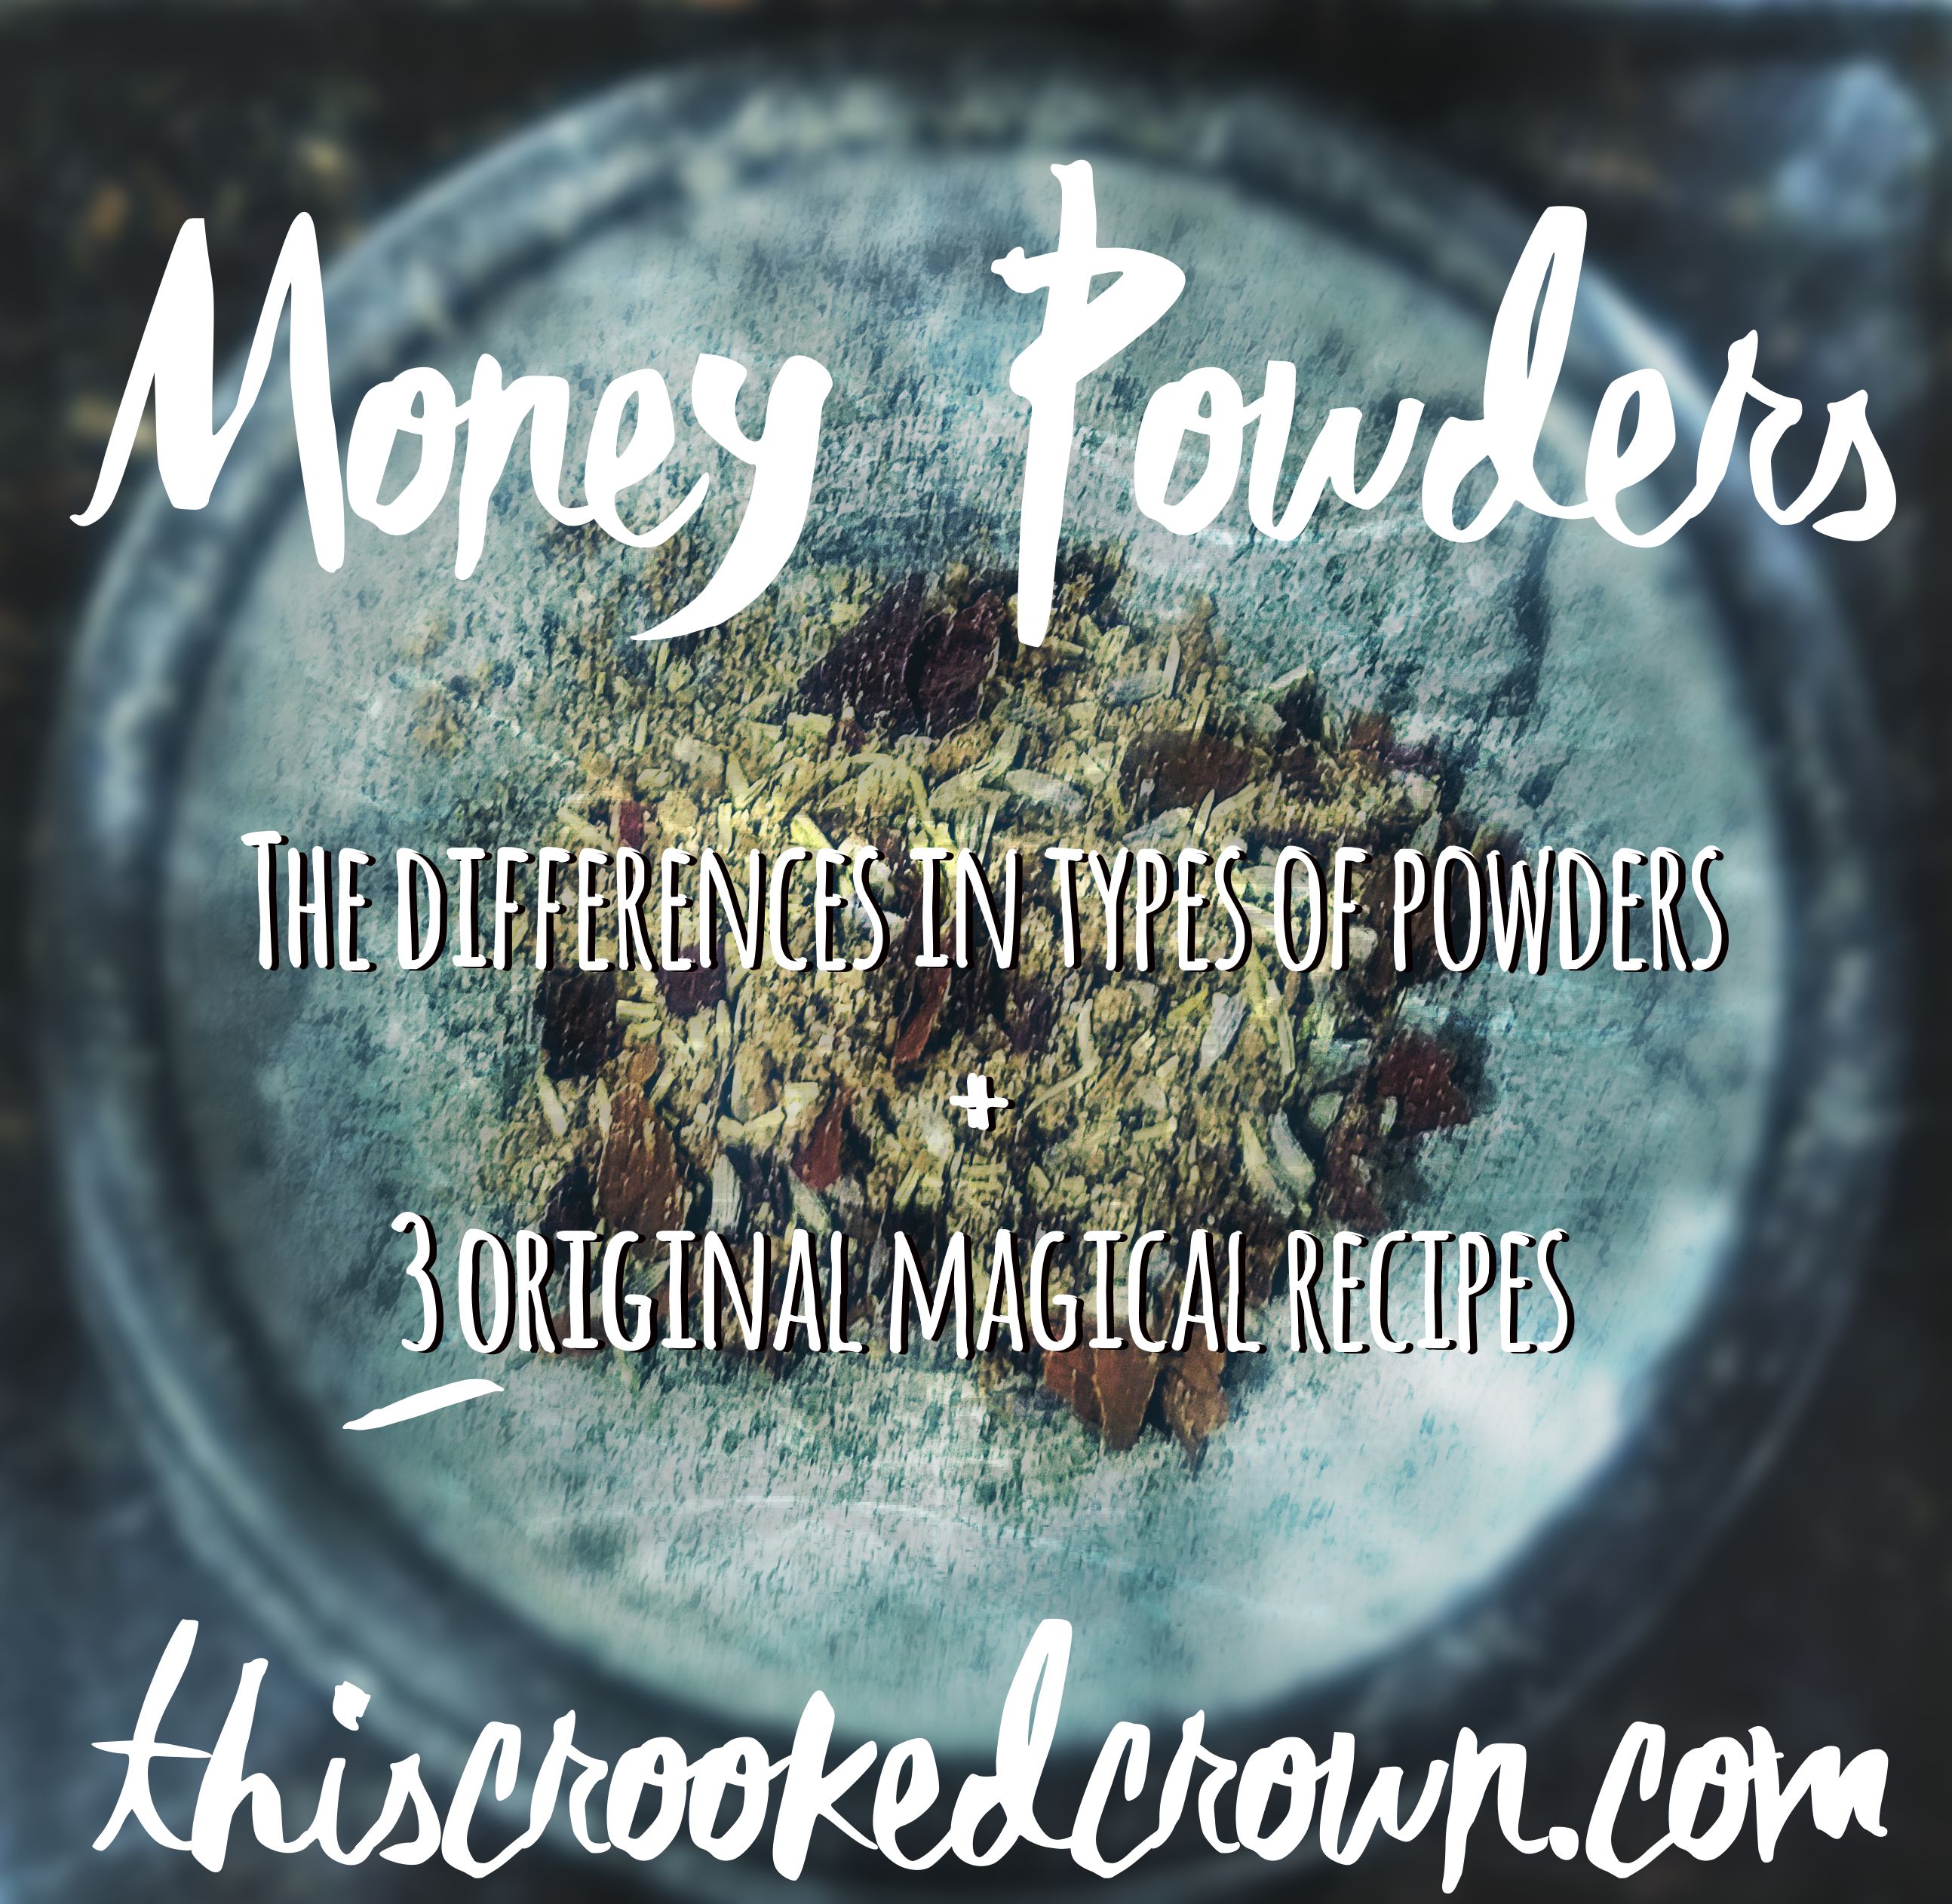 For All Sorts of Money Powder by This Crooked Crown